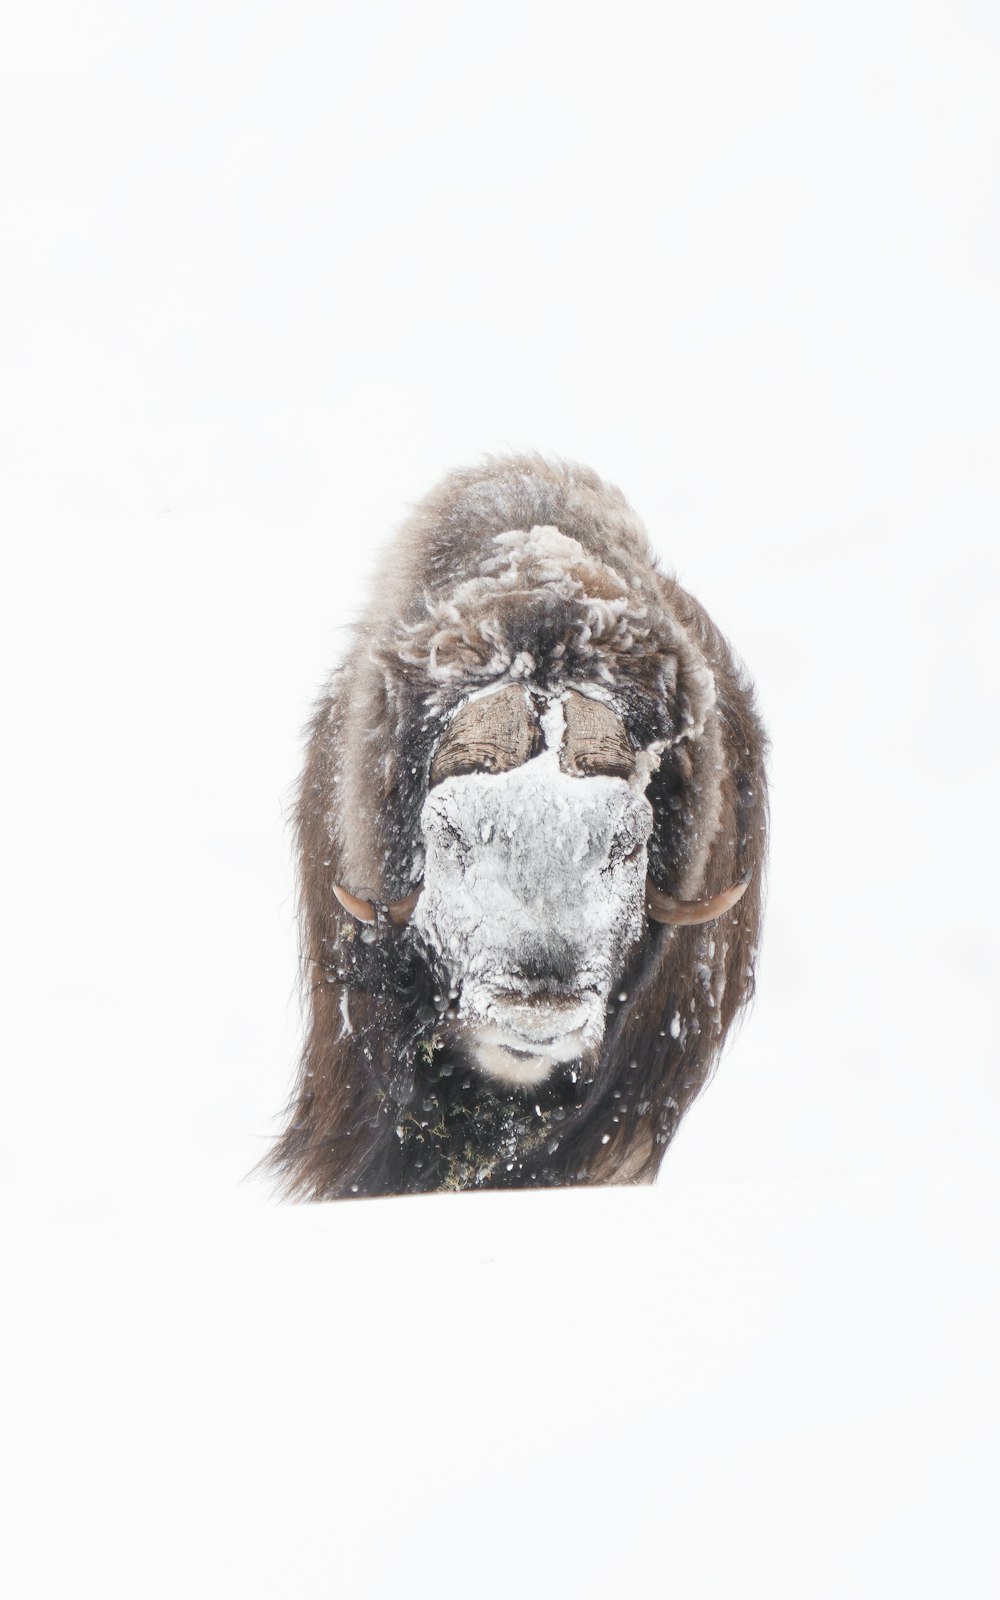 a monkey wearing a mask in the snow